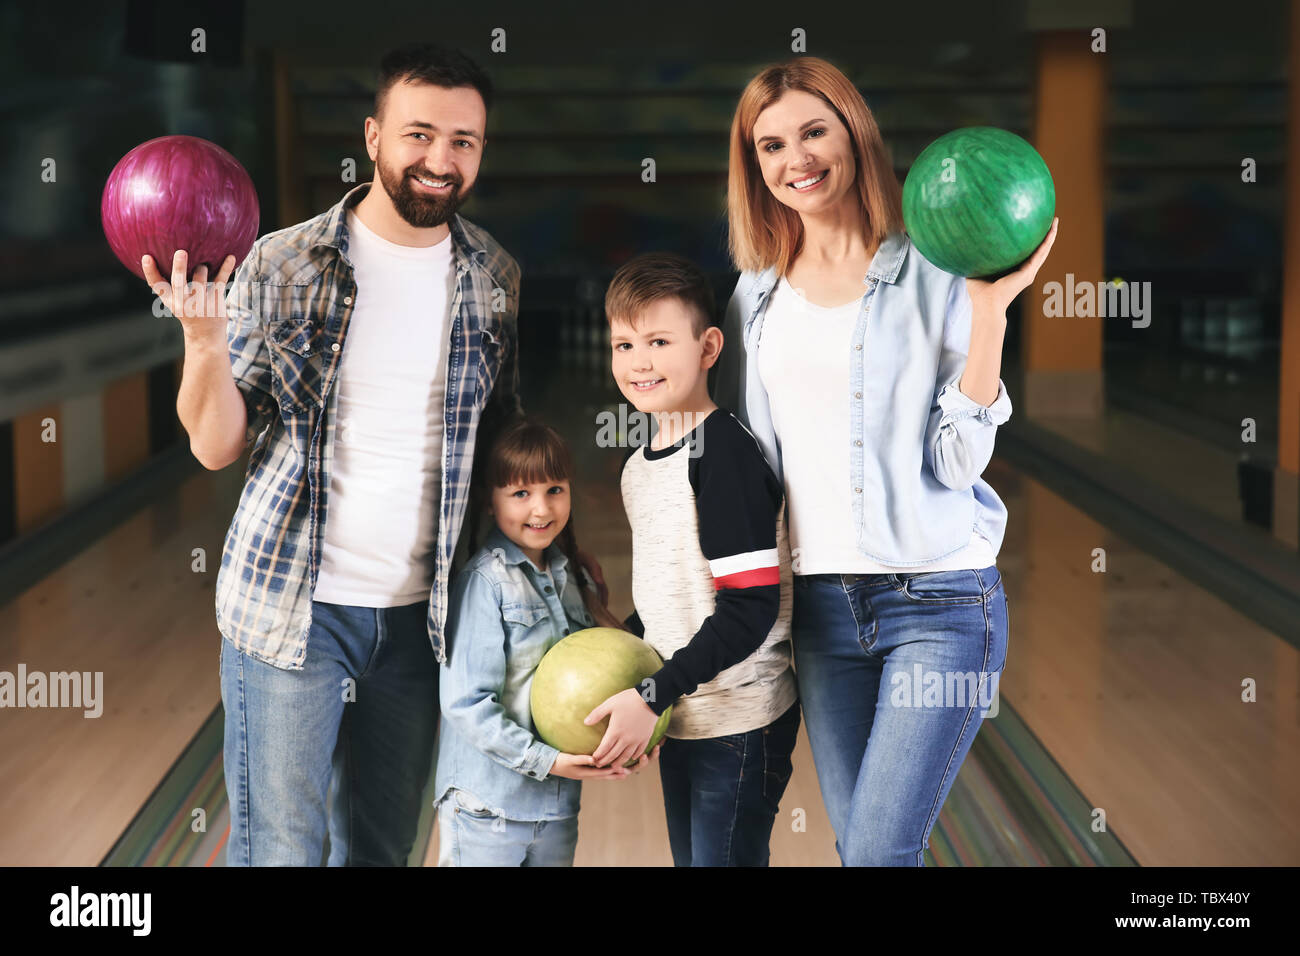 Happy family at bowling club Stock Photo